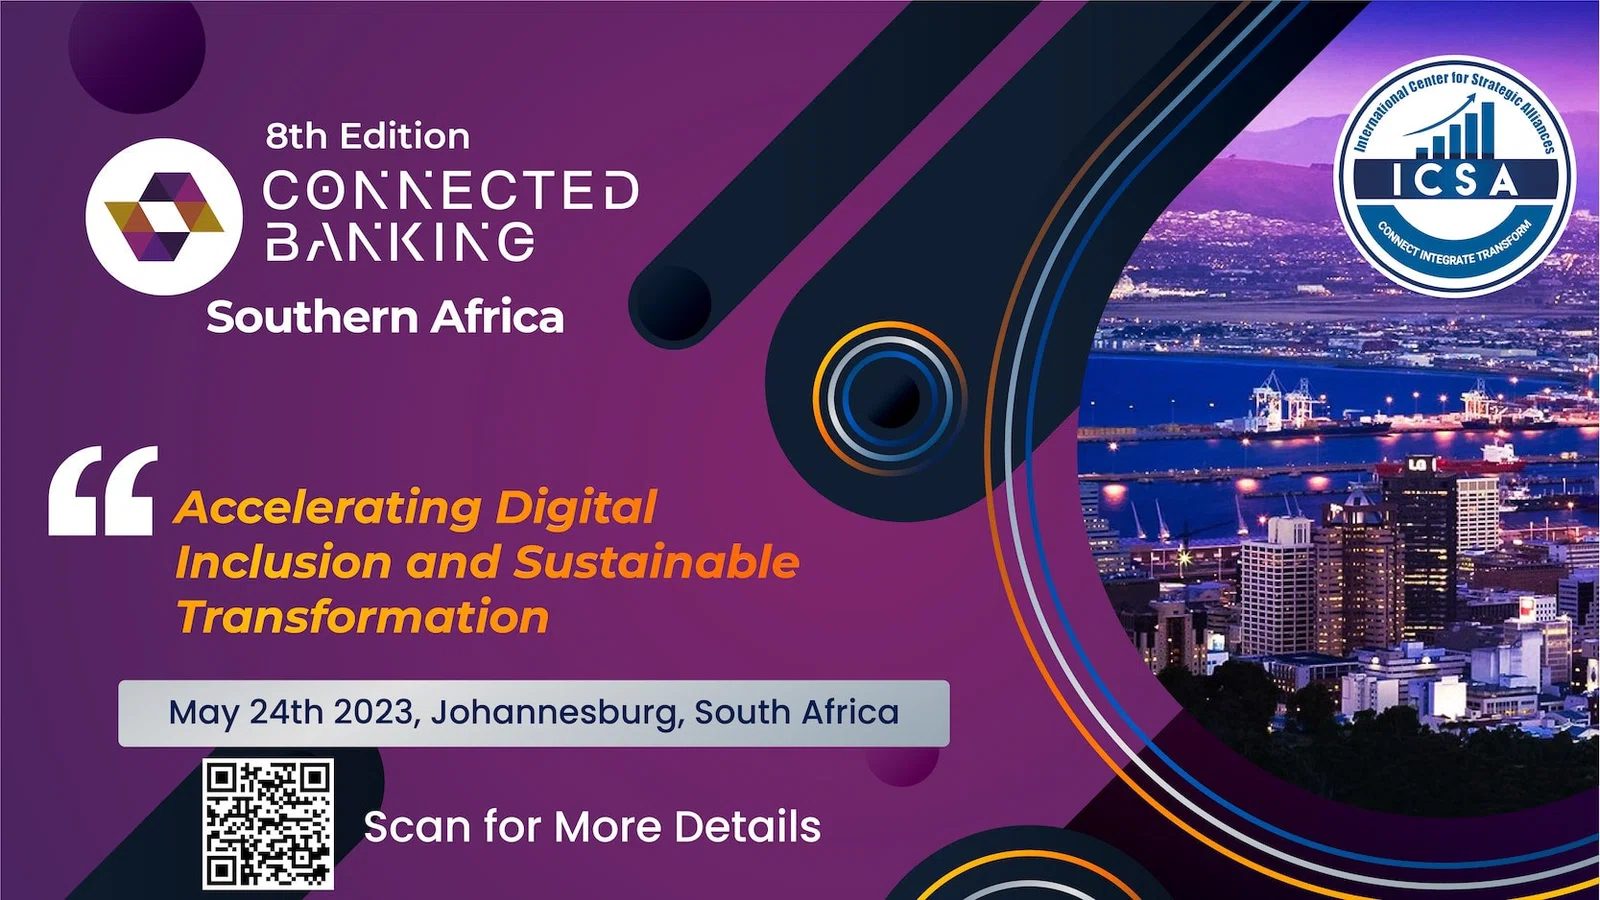 Connected Banking Summit Southern Africa - 8th Edition